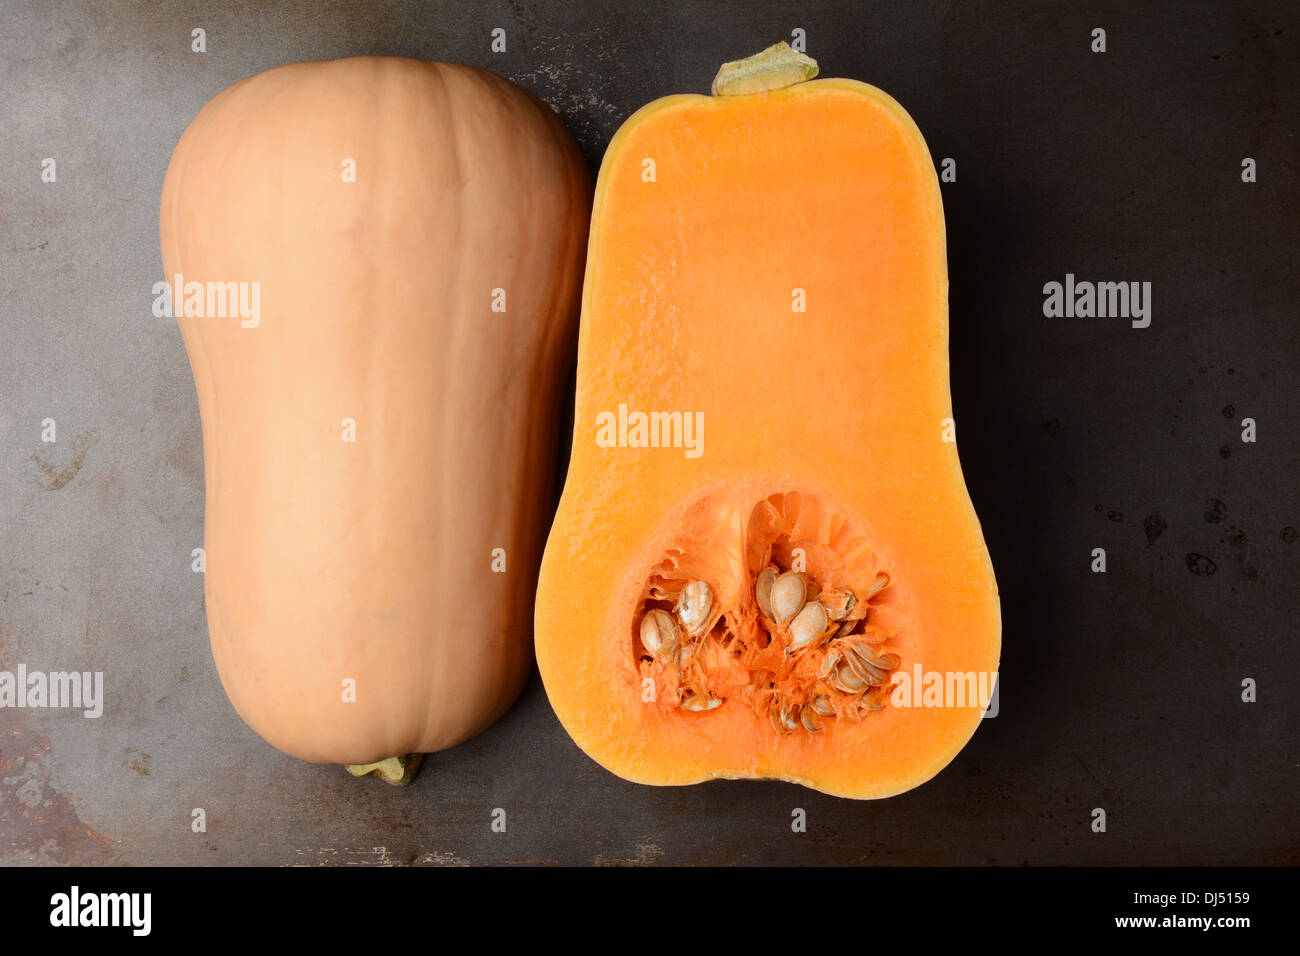 Butternut Squash on a metal cooking sheet. The fruit is cut in half showing both the inside and outside. Horizontal format. Stock Photo